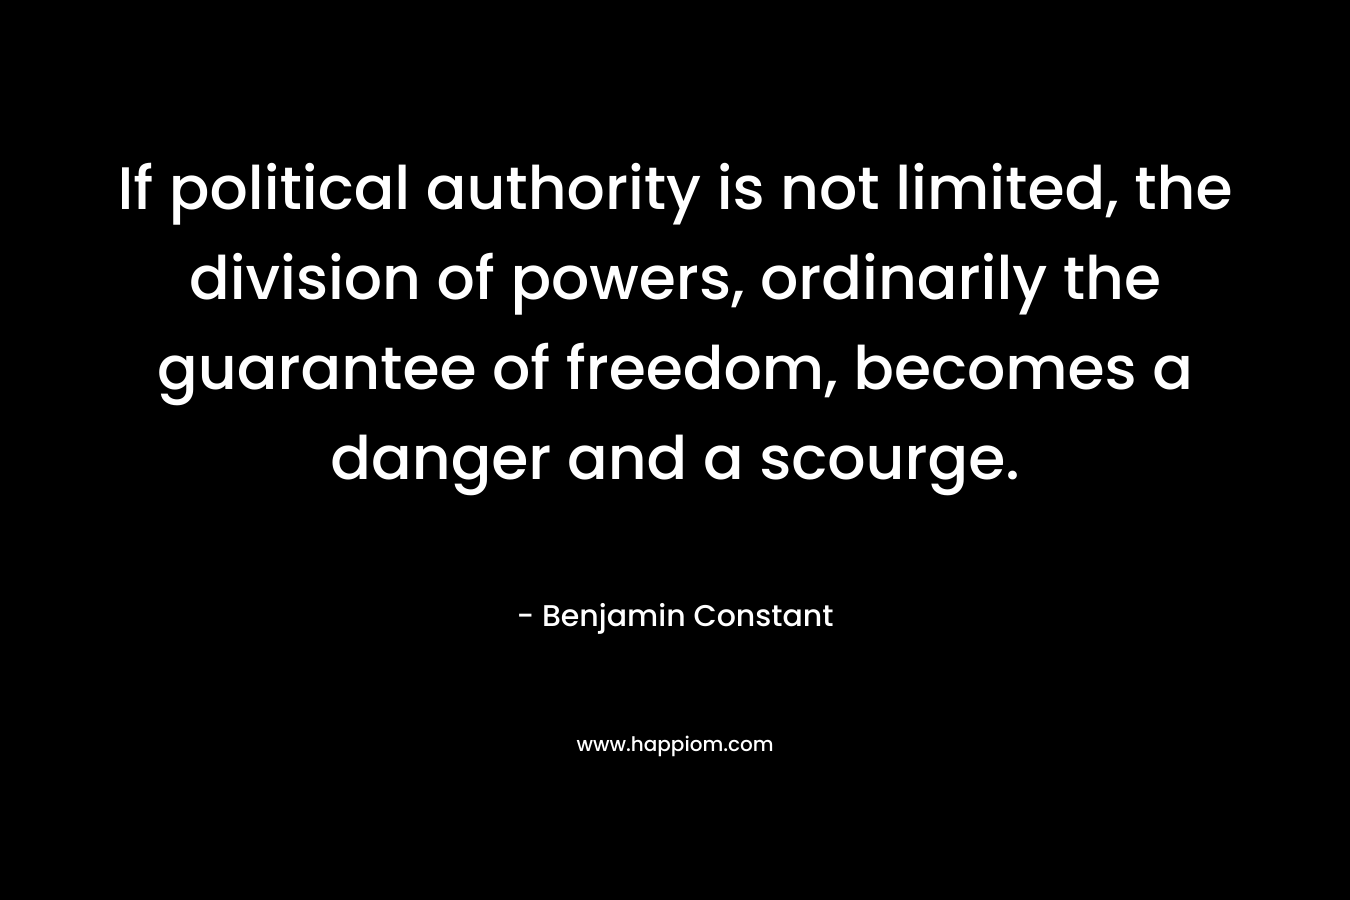 If political authority is not limited, the division of powers, ordinarily the guarantee of freedom, becomes a danger and a scourge. – Benjamin Constant